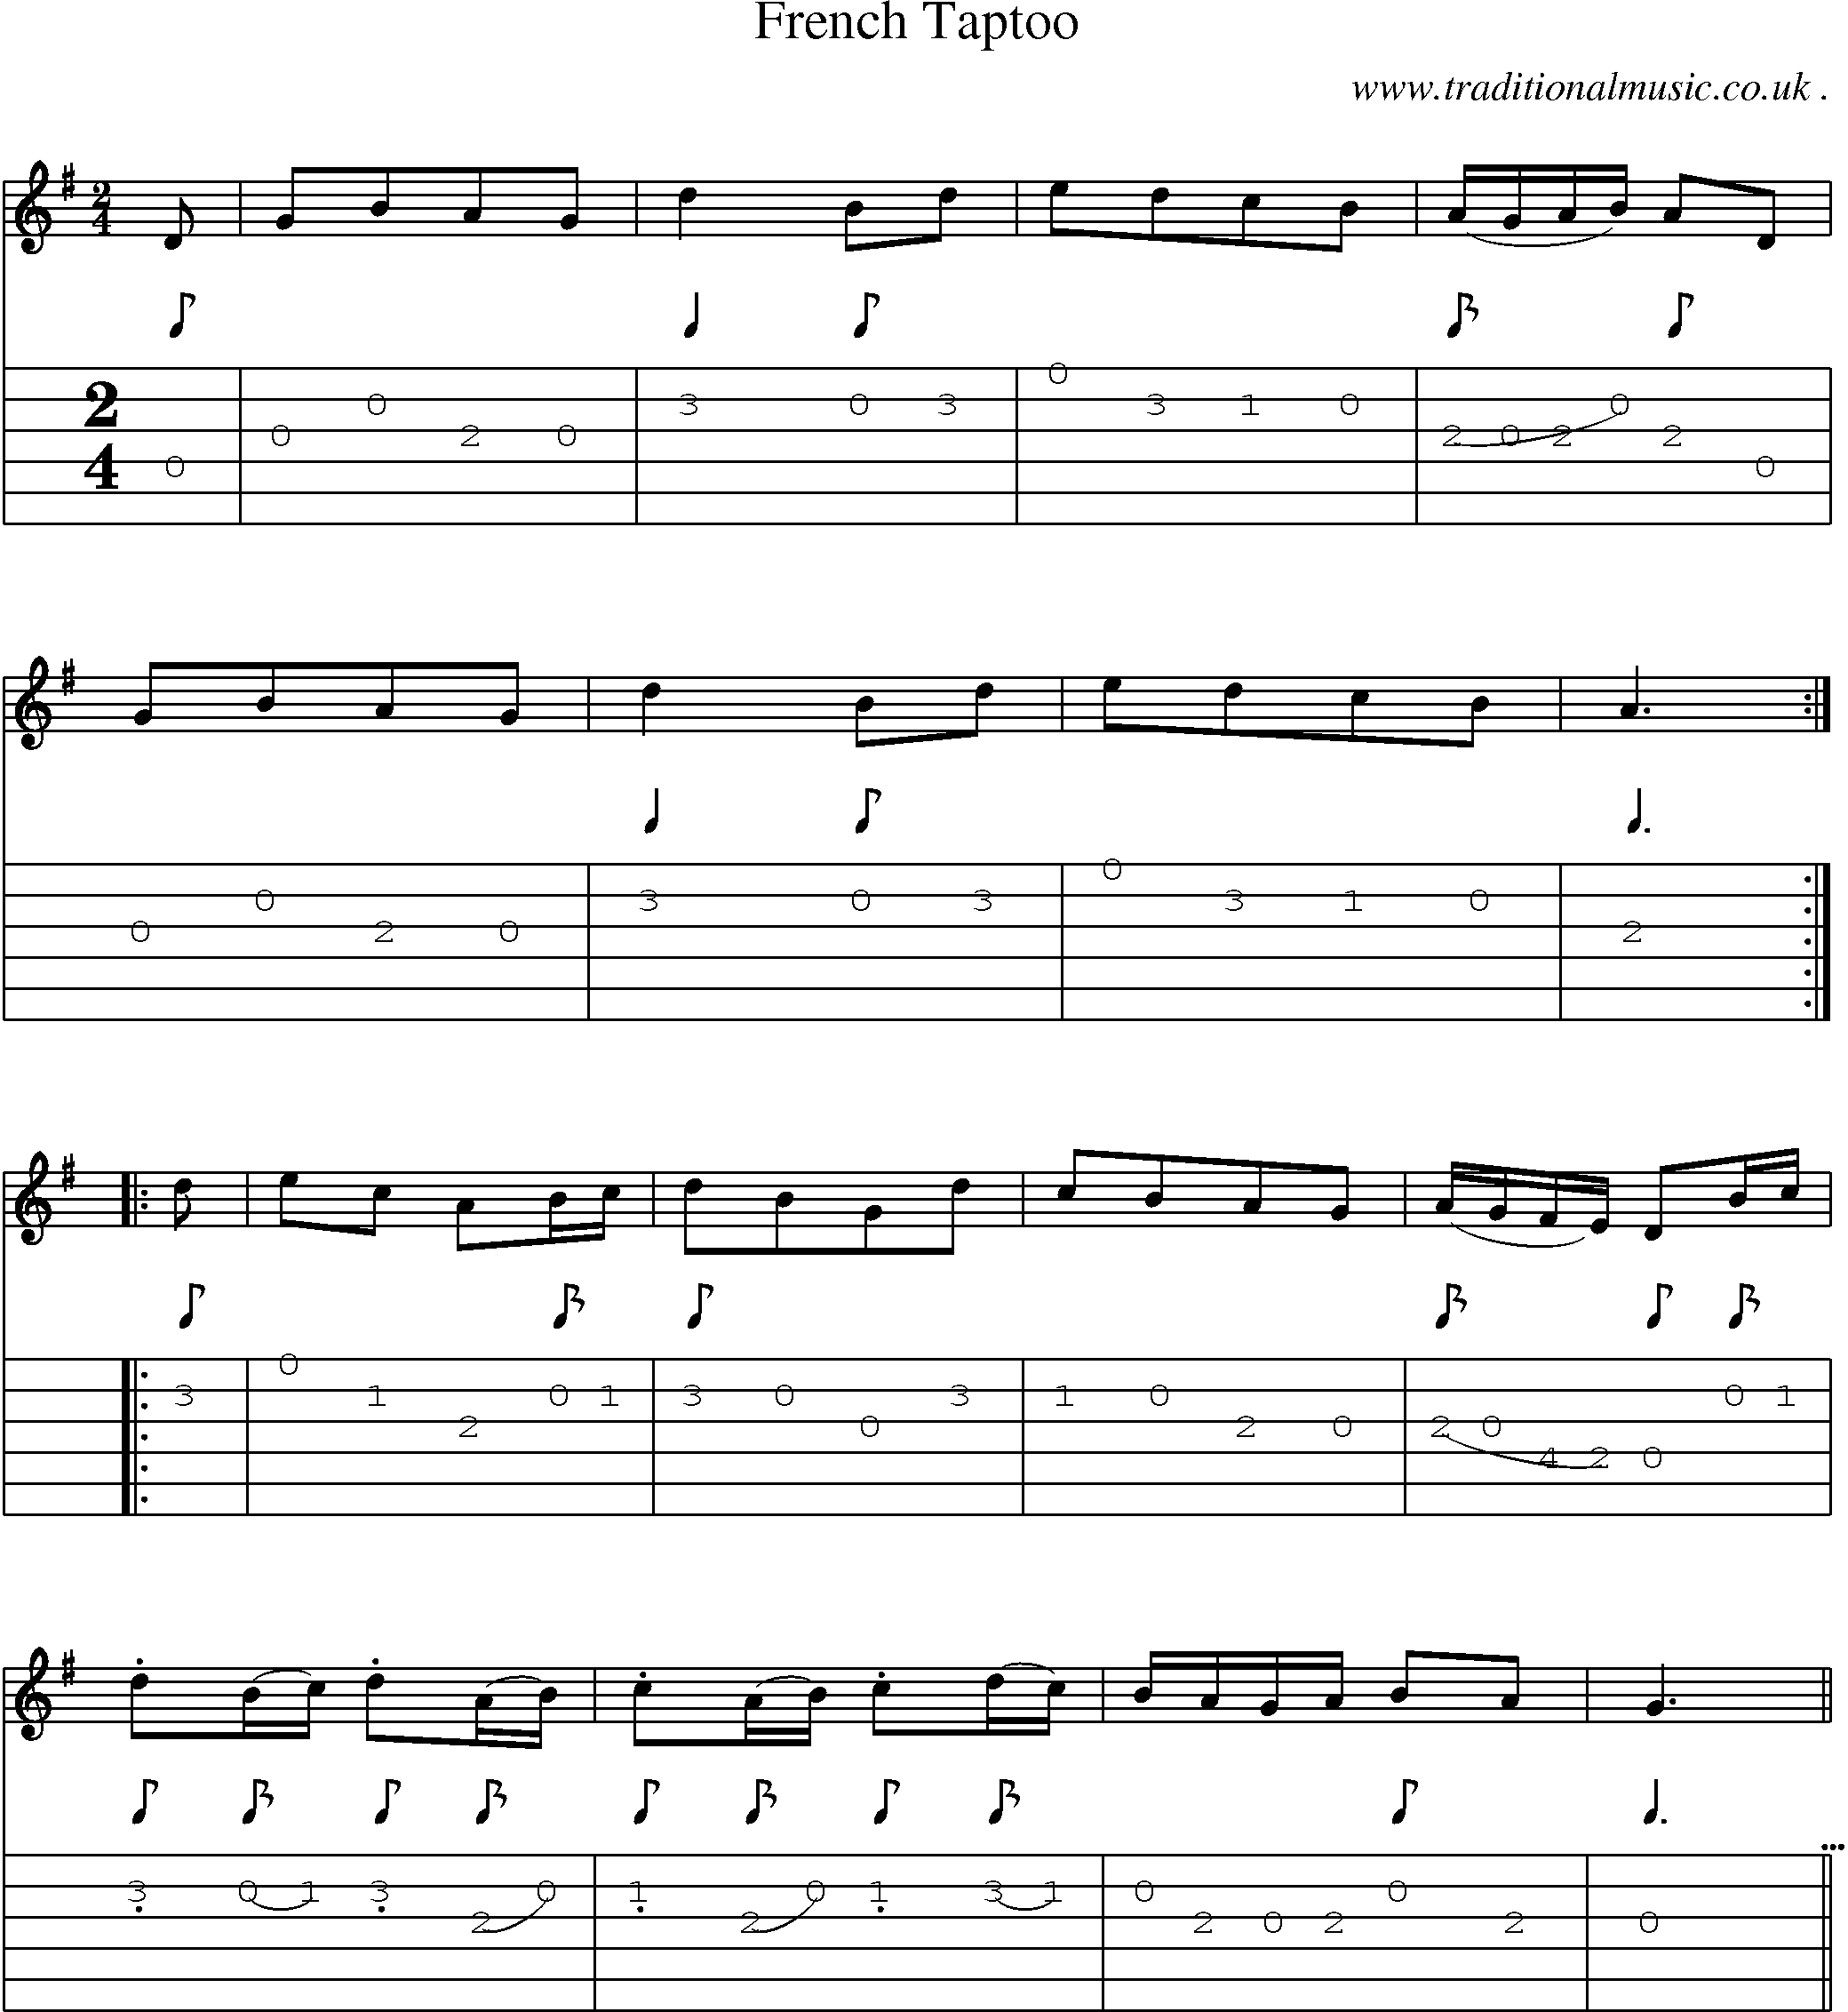 Sheet-Music and Guitar Tabs for French Taptoo